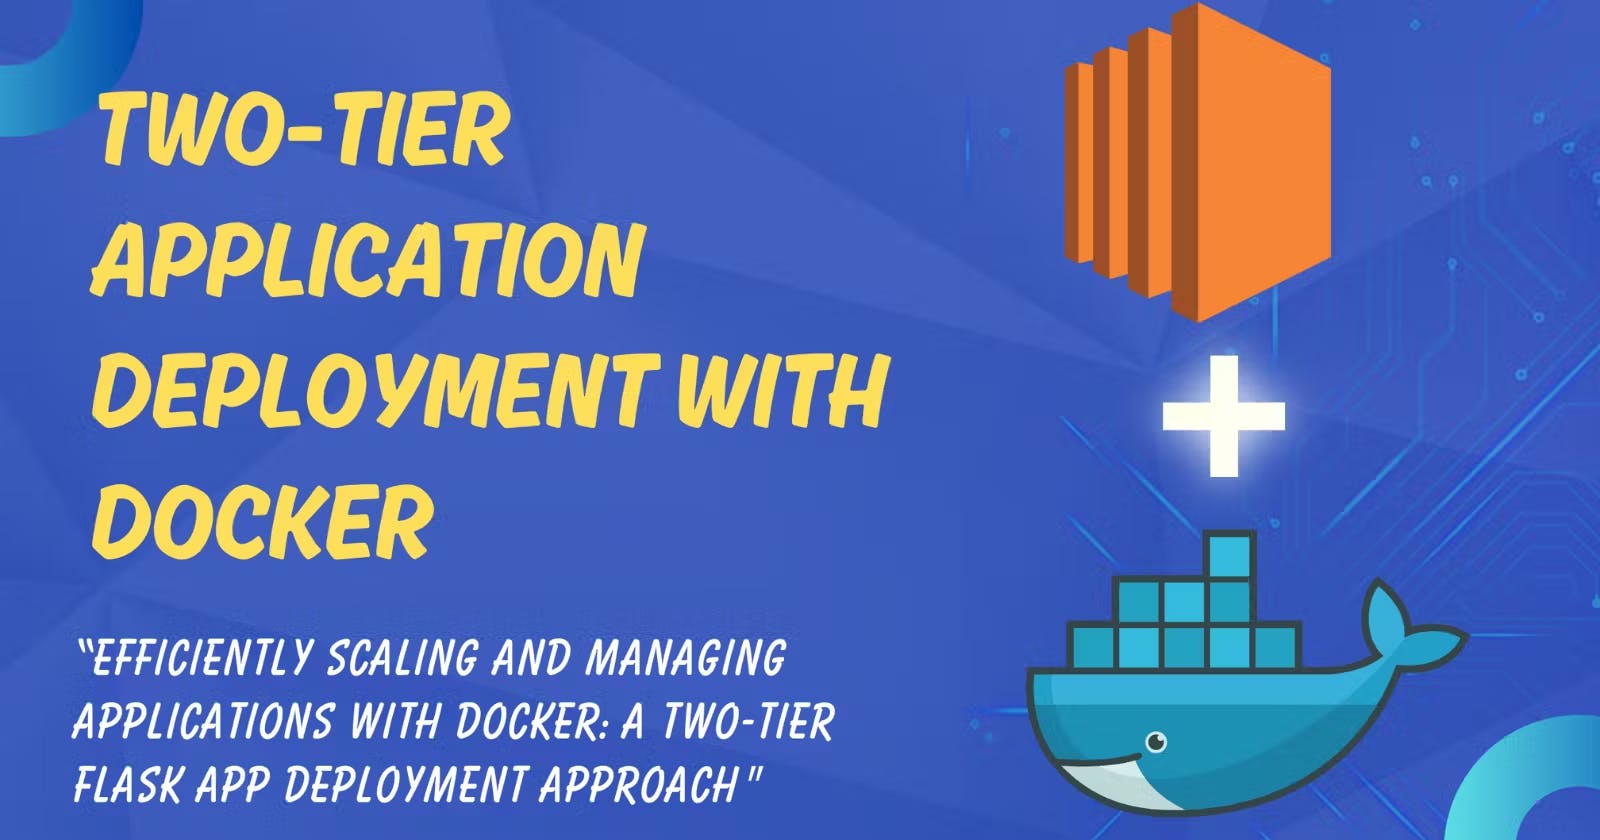 Two-Tier Application Deployment with Docker